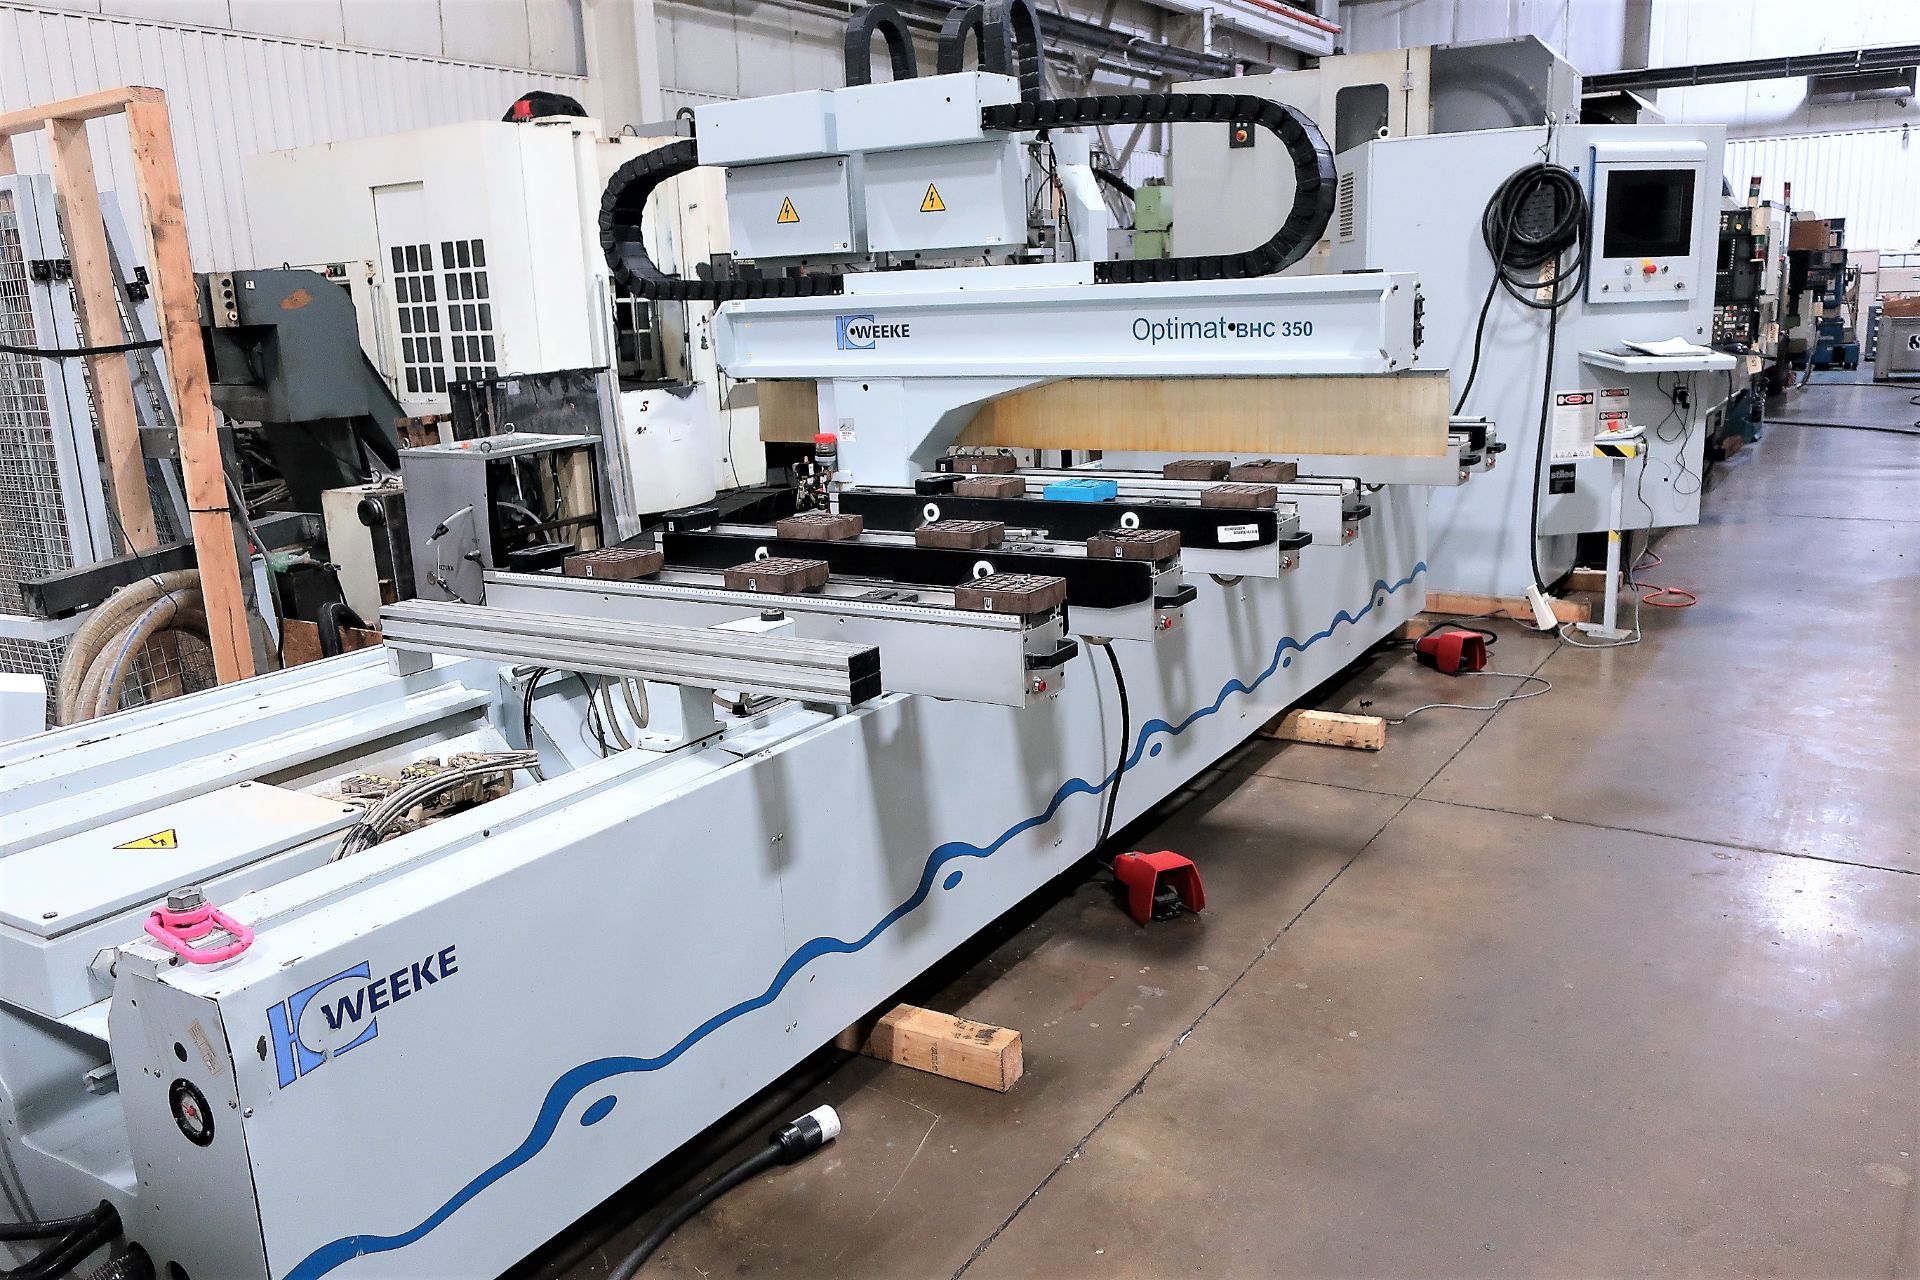 12'x4' WEEKE OPTIMAT BHC 350 CNC ROUTER, POD AND RAIL DESIGN, NEW 2006